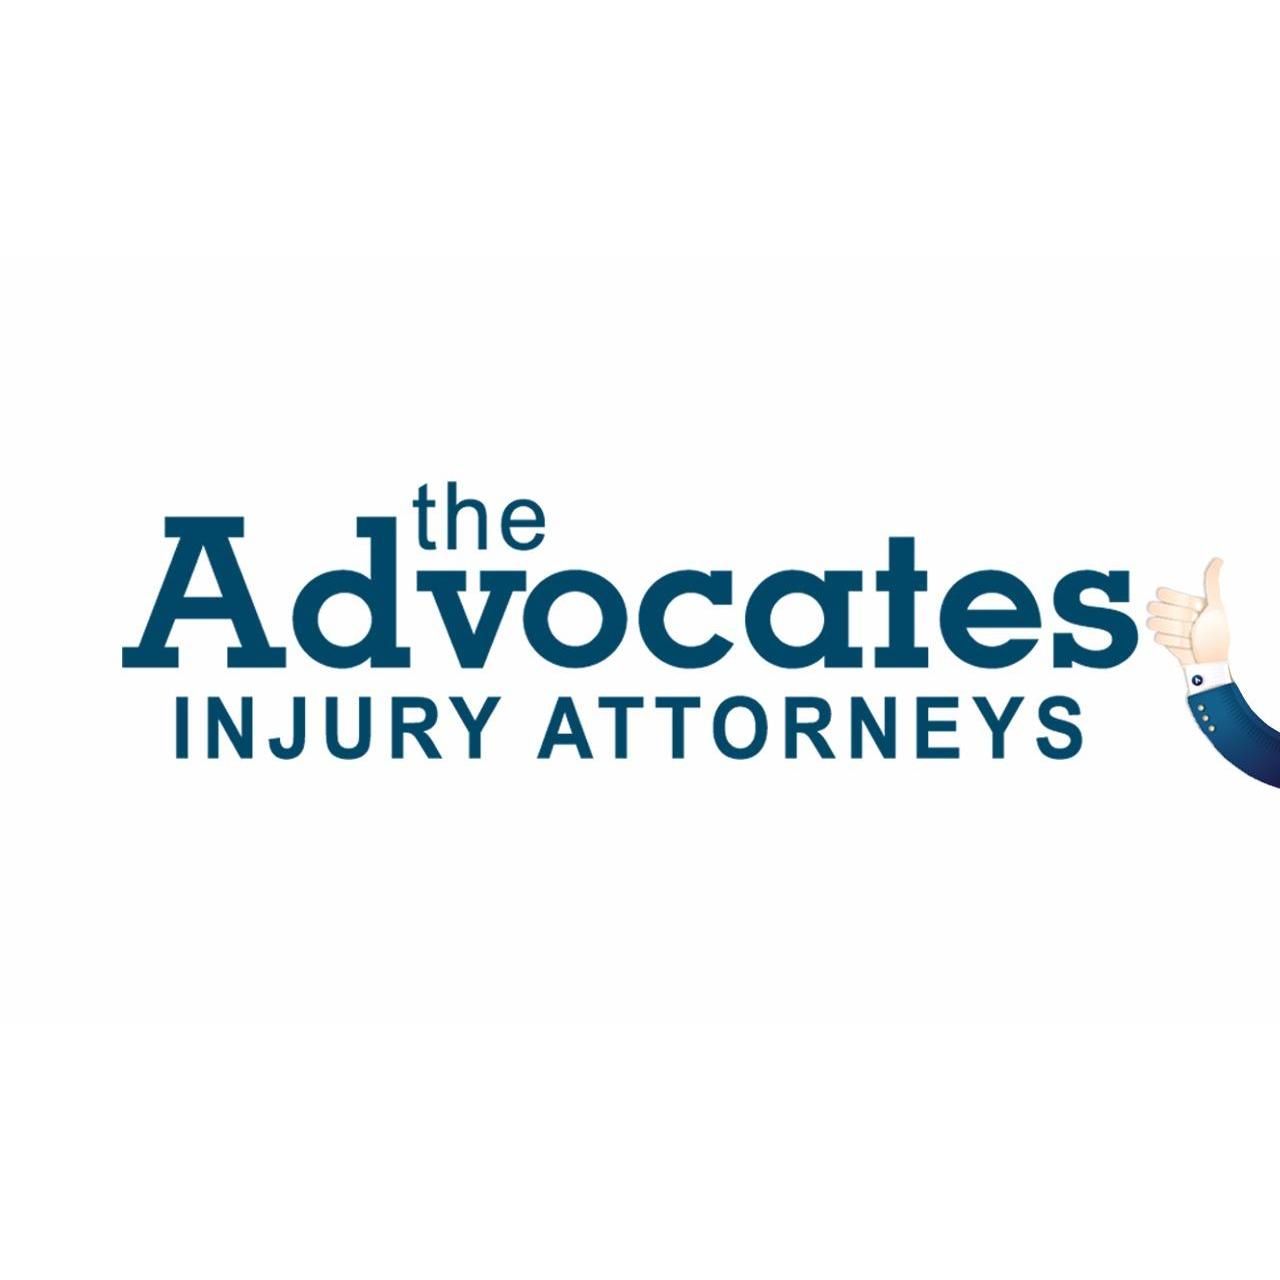 The Advocates Injury Attorneys - Billings, MT 59101 - (406)272-6986 | ShowMeLocal.com